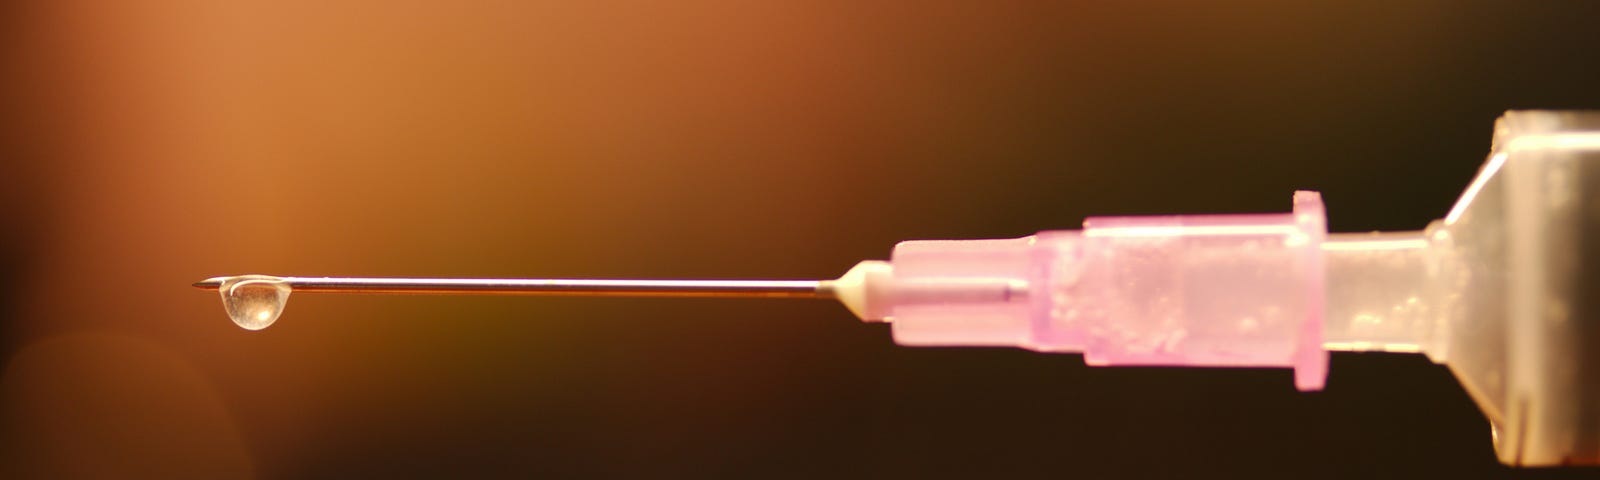 Liquid dripping off of a needle.